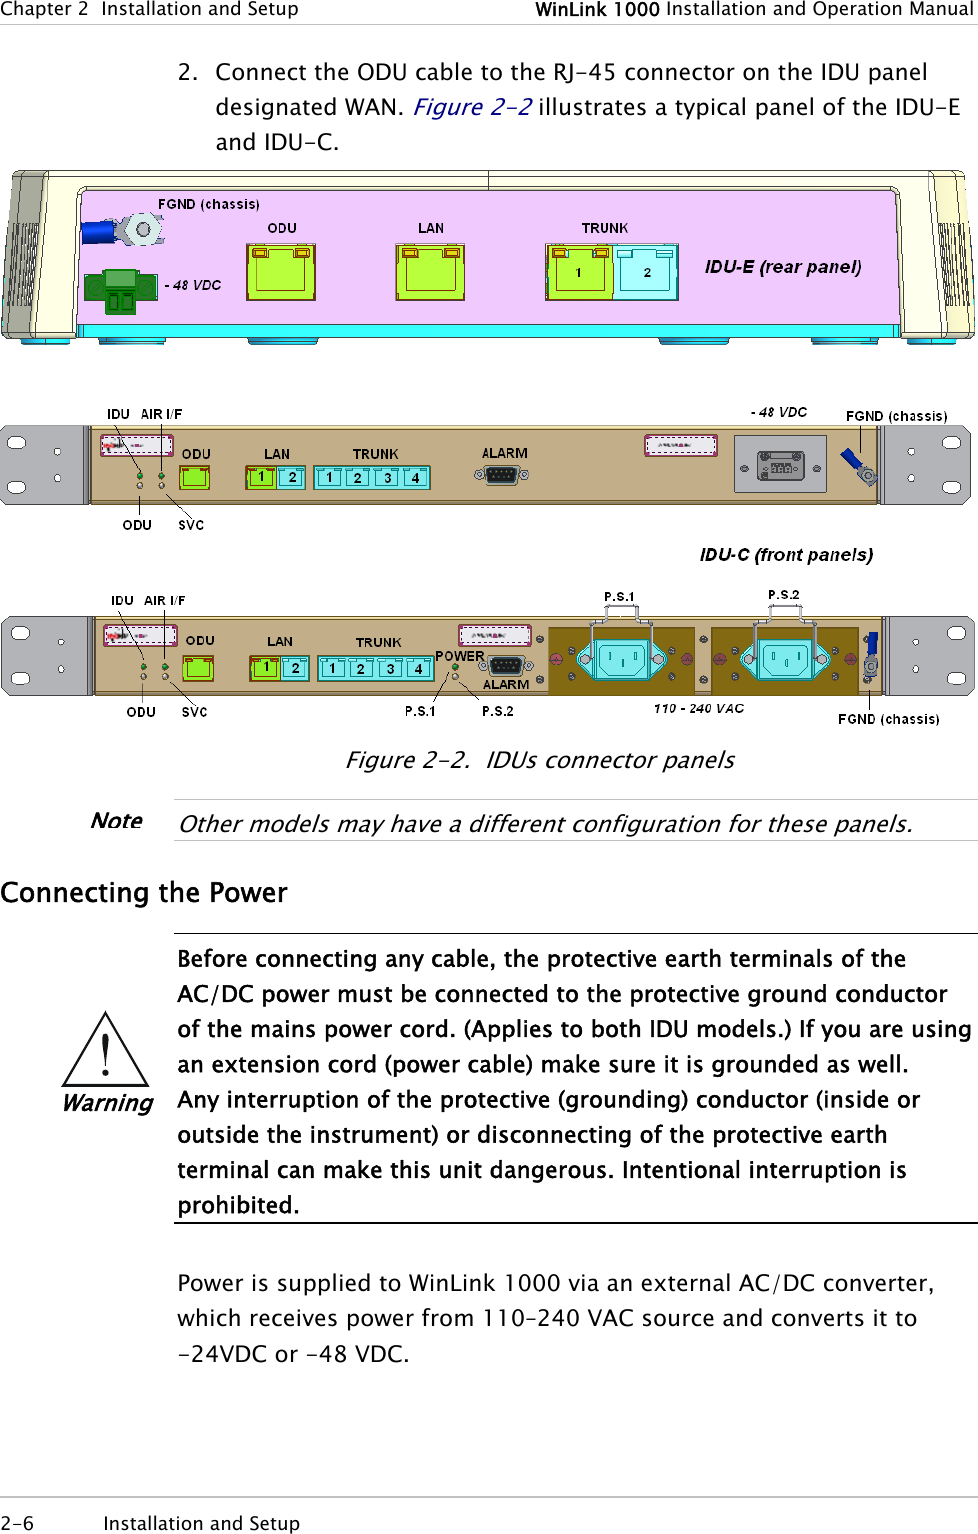 Chapter 2  Installation and Setup  WinLink 1000 Installation and Operation Manual 2-6  Installation and Setup  2. Connect the ODU cable to the RJ-45 connector on the IDU panel designated WAN. Figure 2-2 illustrates a typical panel of the IDU-E and IDU-C.    Figure 2-2.  IDUs connector panels  Other models may have a different configuration for these panels.  Connecting the Power  Before connecting any cable, the protective earth terminals of the AC/DC power must be connected to the protective ground conductor of the mains power cord. (Applies to both IDU models.) If you are using an extension cord (power cable) make sure it is grounded as well. Any interruption of the protective (grounding) conductor (inside or outside the instrument) or disconnecting of the protective earth terminal can make this unit dangerous. Intentional interruption is prohibited.  Power is supplied to WinLink 1000 via an external AC/DC converter, which receives power from 110–240 VAC source and converts it to -24VDC or -48 VDC. Warning Note